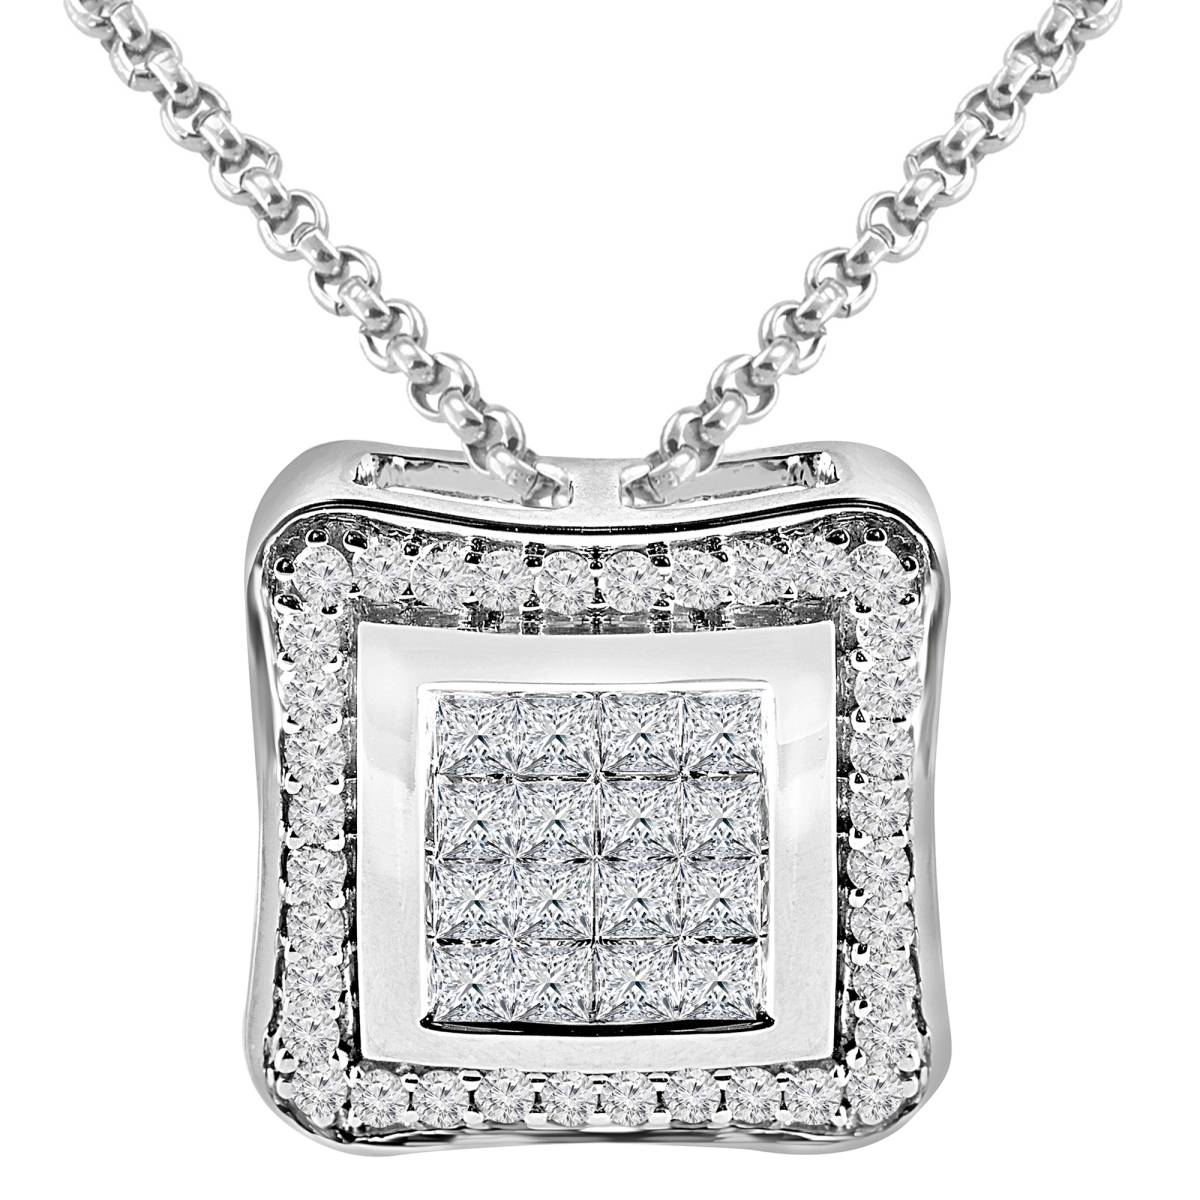 Mdr170152 0.6 Ctw Round Diamond Halo Cluster Pendant Necklace In 14k